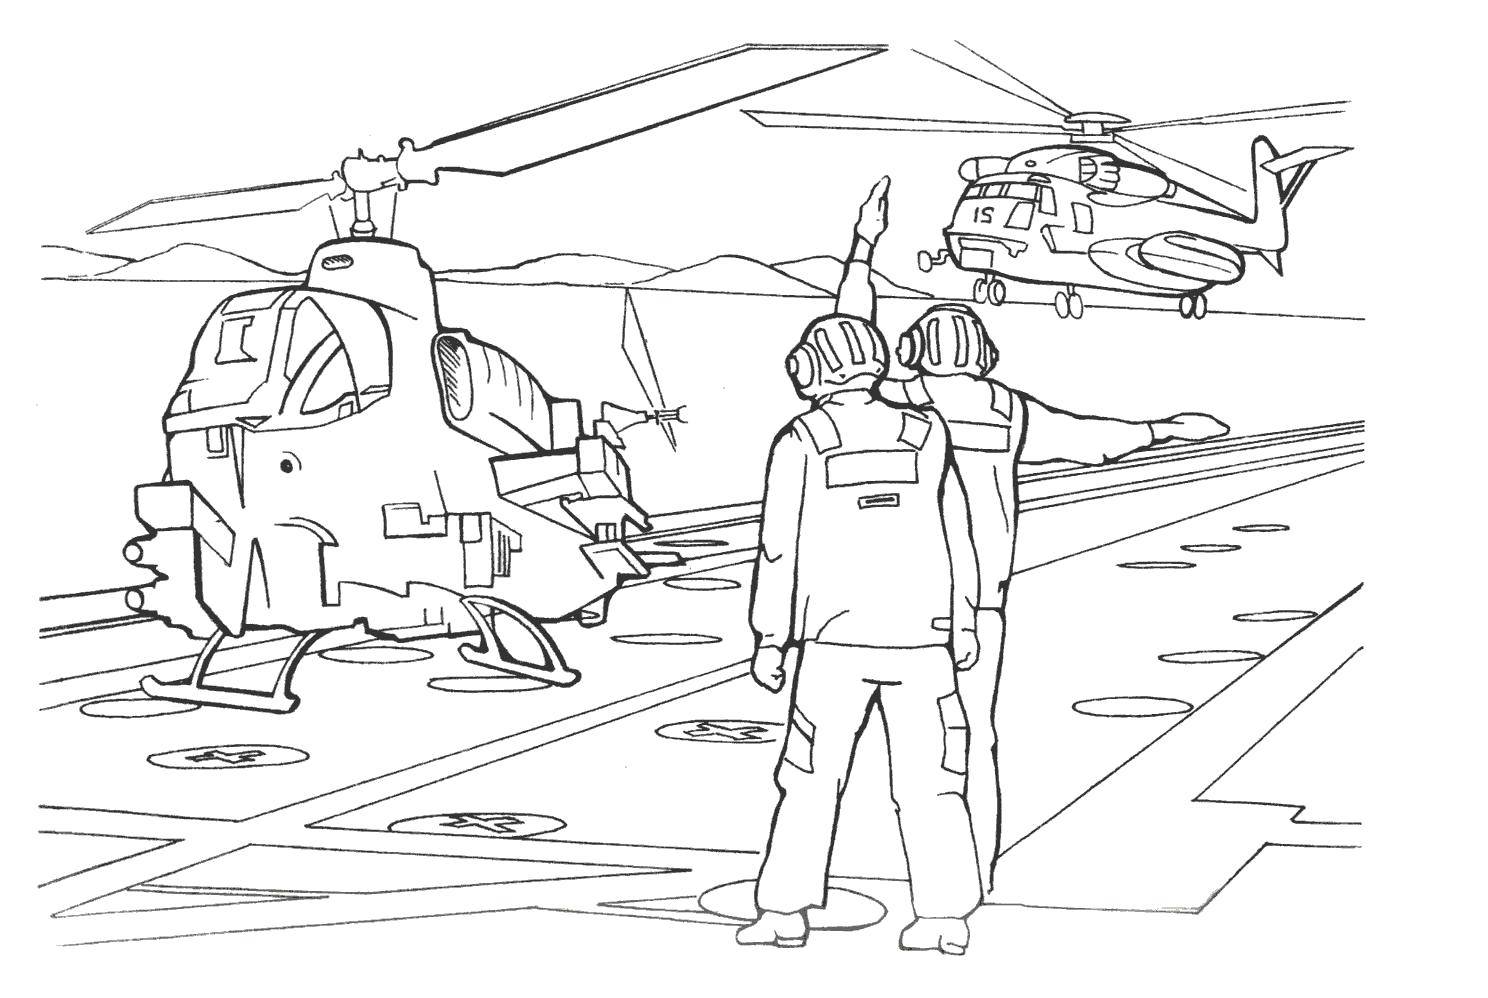 Coloring The landing of military helicopters. Category military coloring pages. Tags:  Military, soldiers, weapons, helicopters.